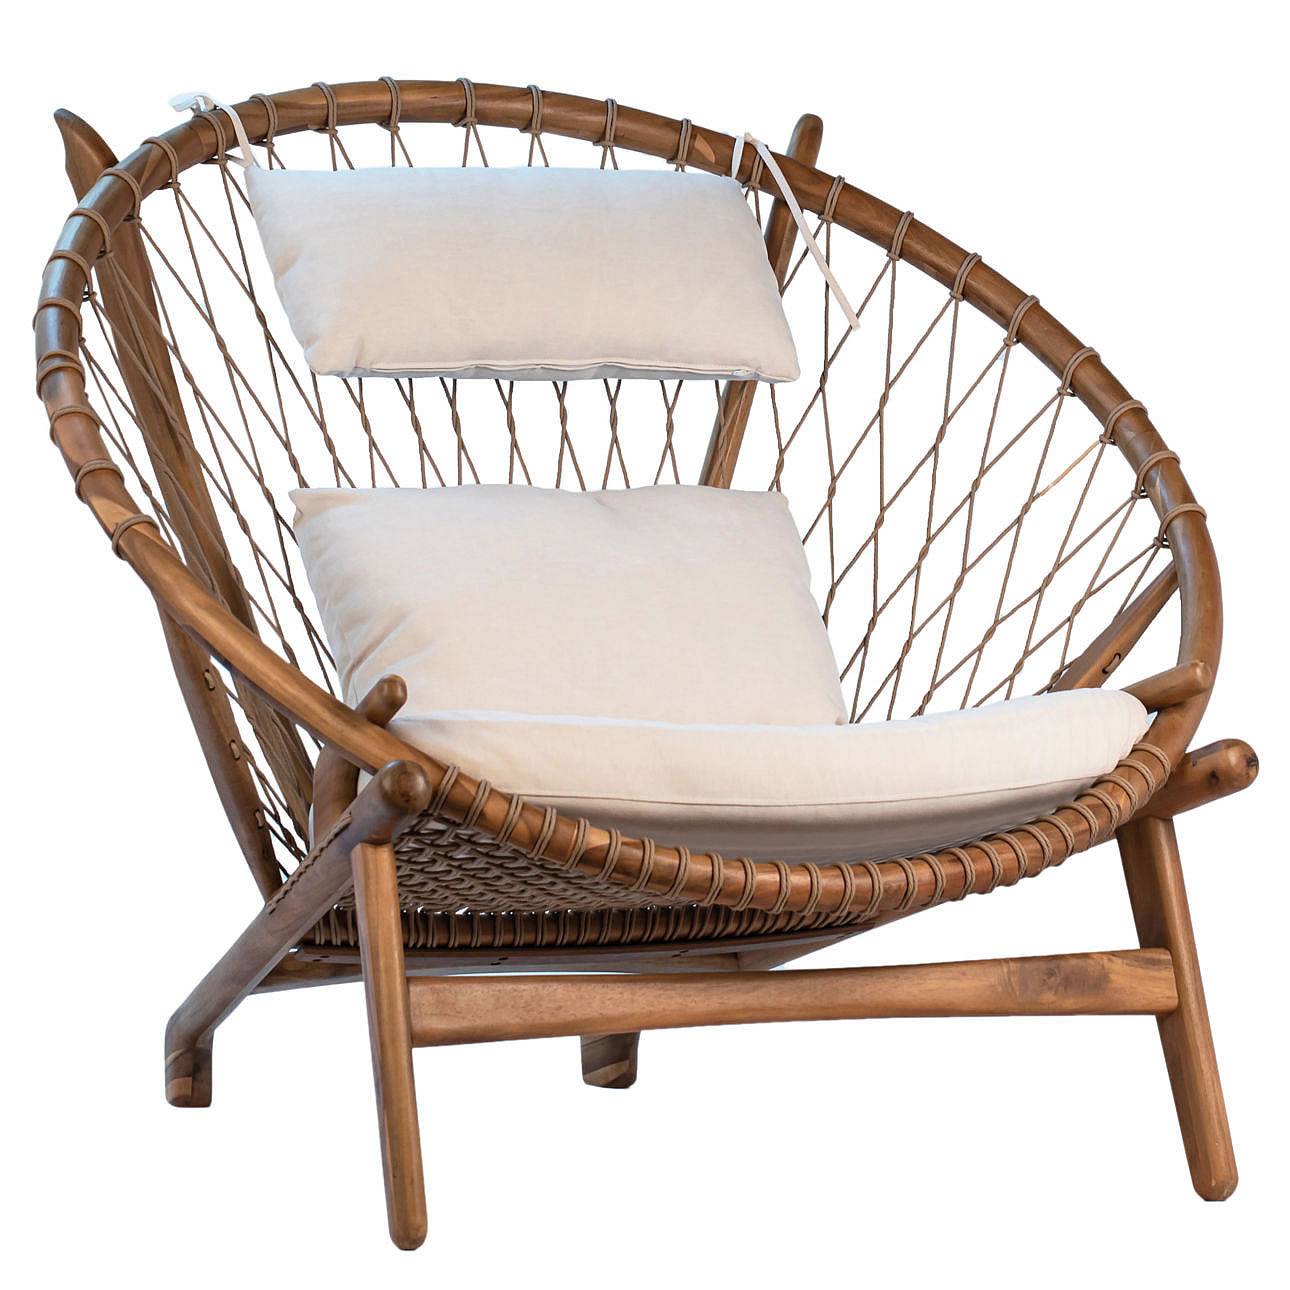 bison-occasional-chair-in-accacia-wood-jute-rope